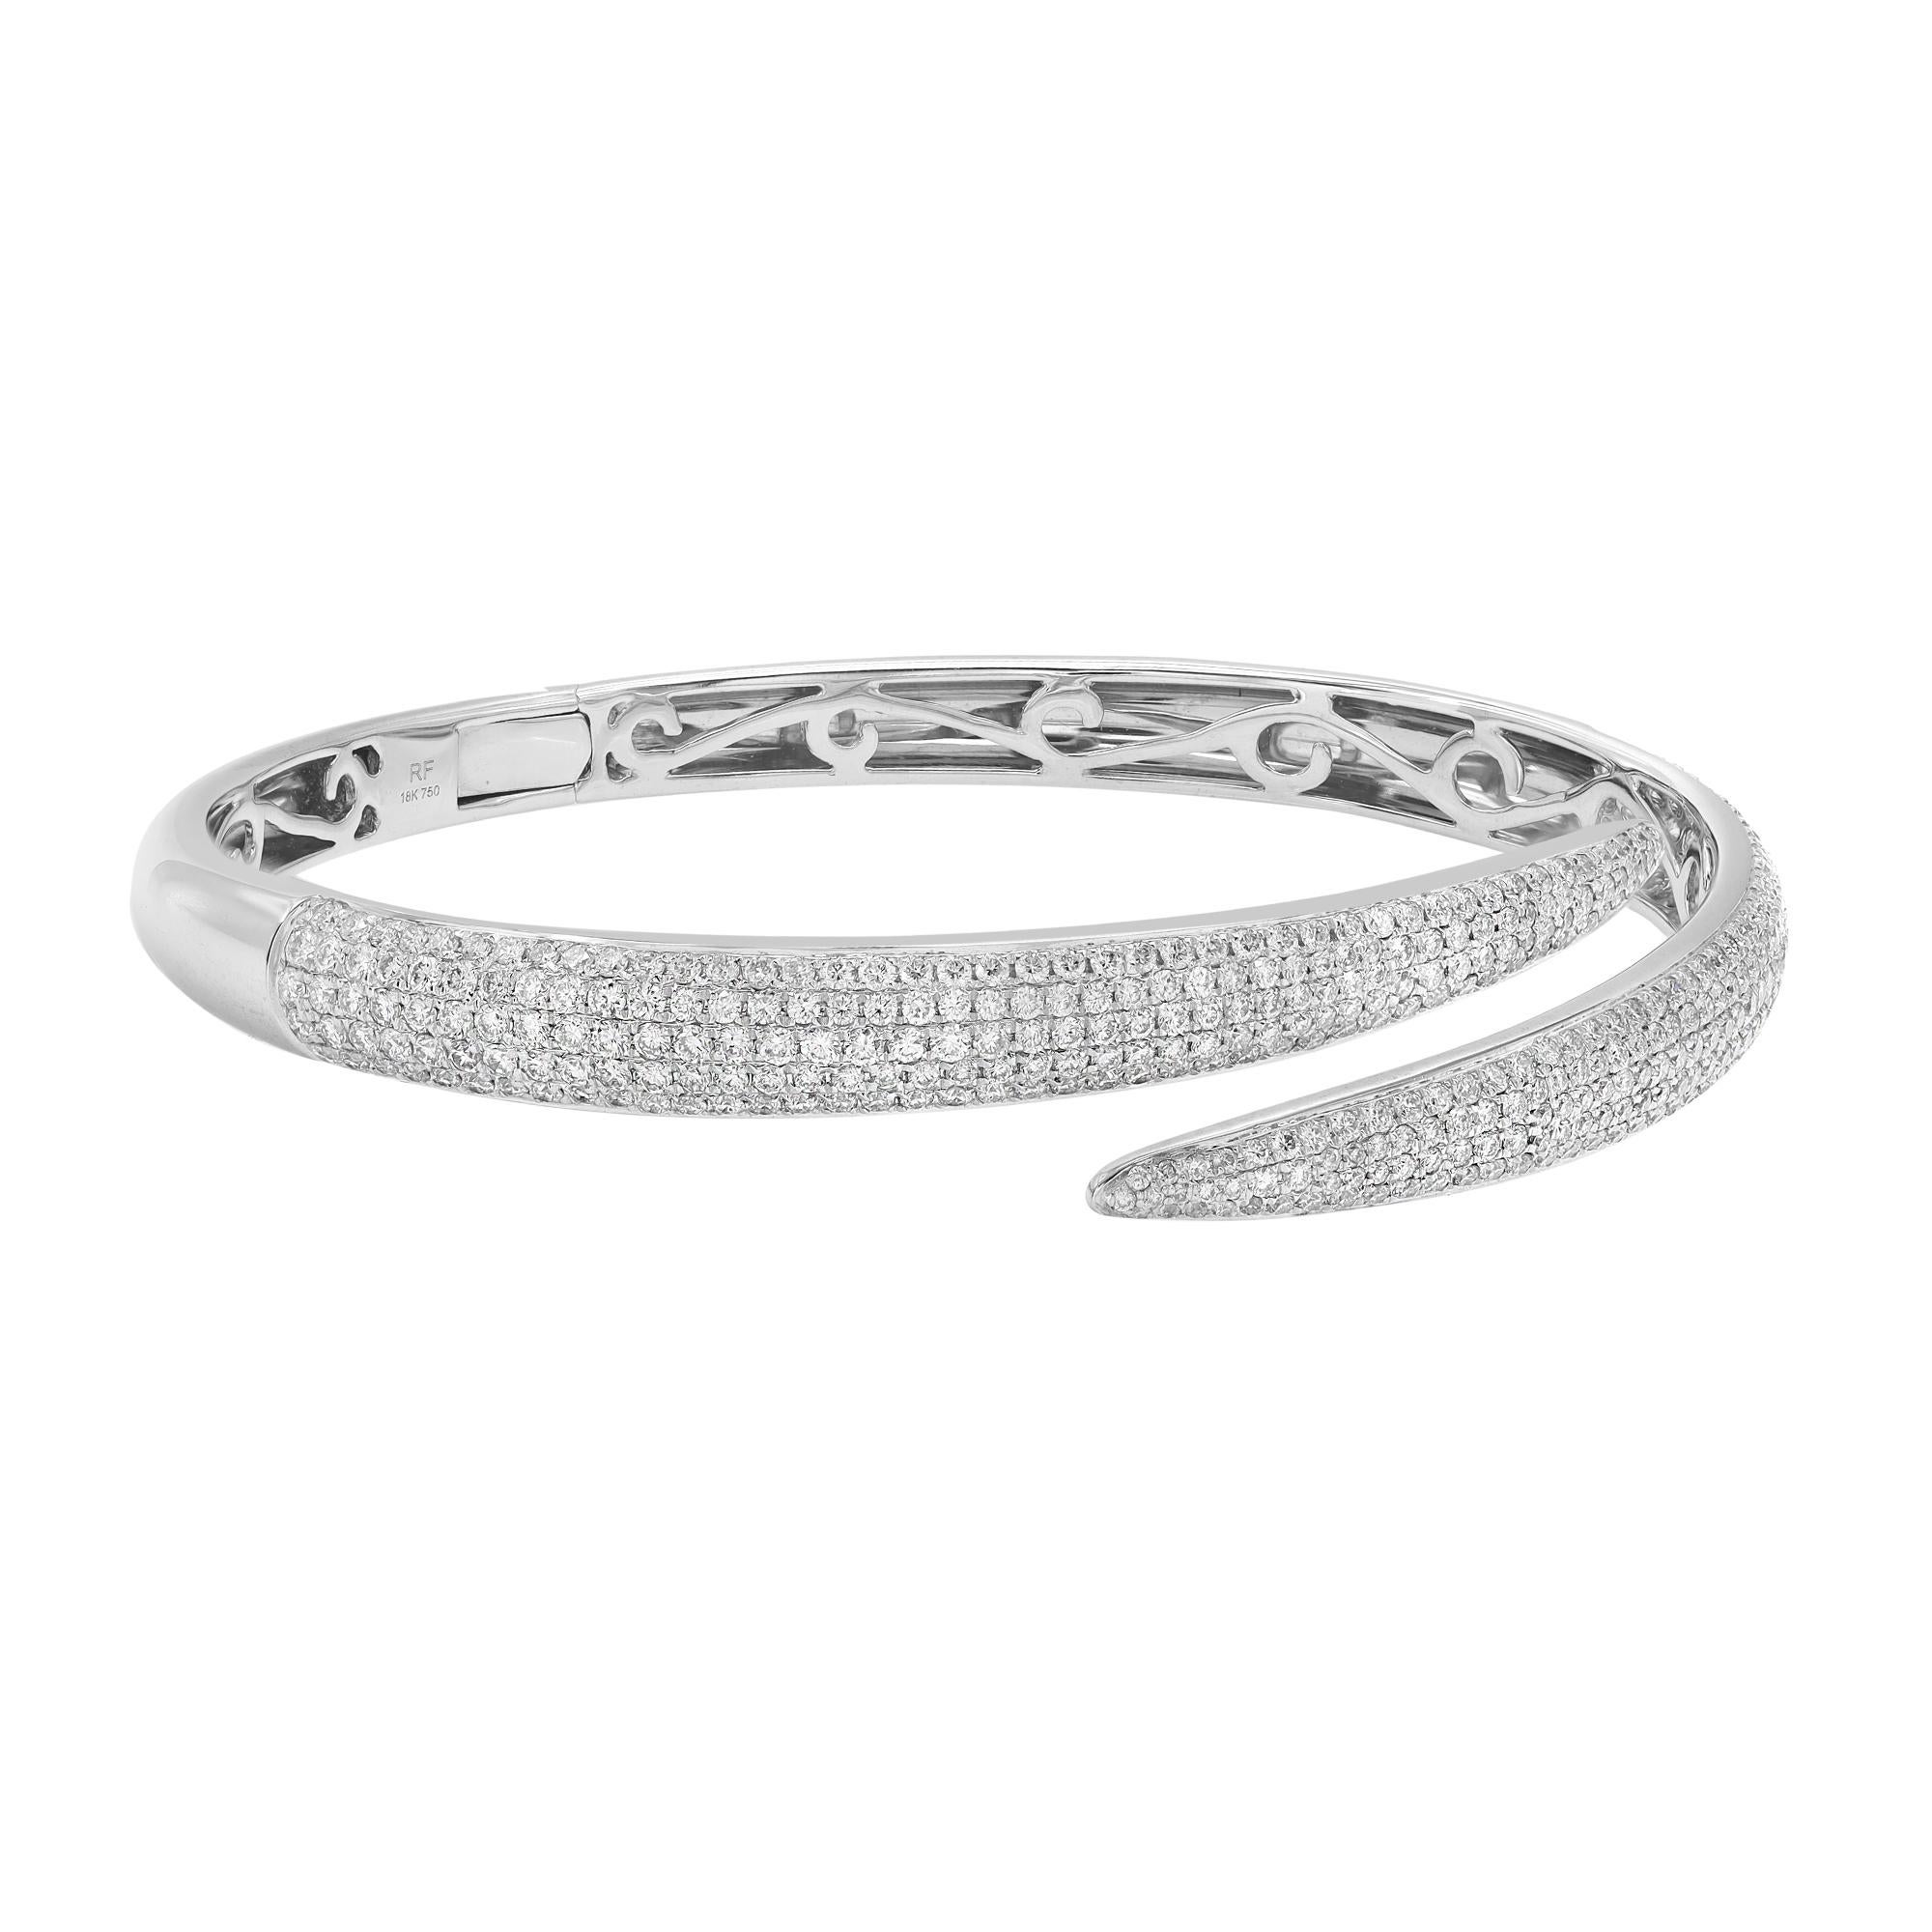 Rachel Koen Pave Set Round Cut Diamond Bangle Bracelet 18K White Gold 2.64Cttw In New Condition For Sale In New York, NY